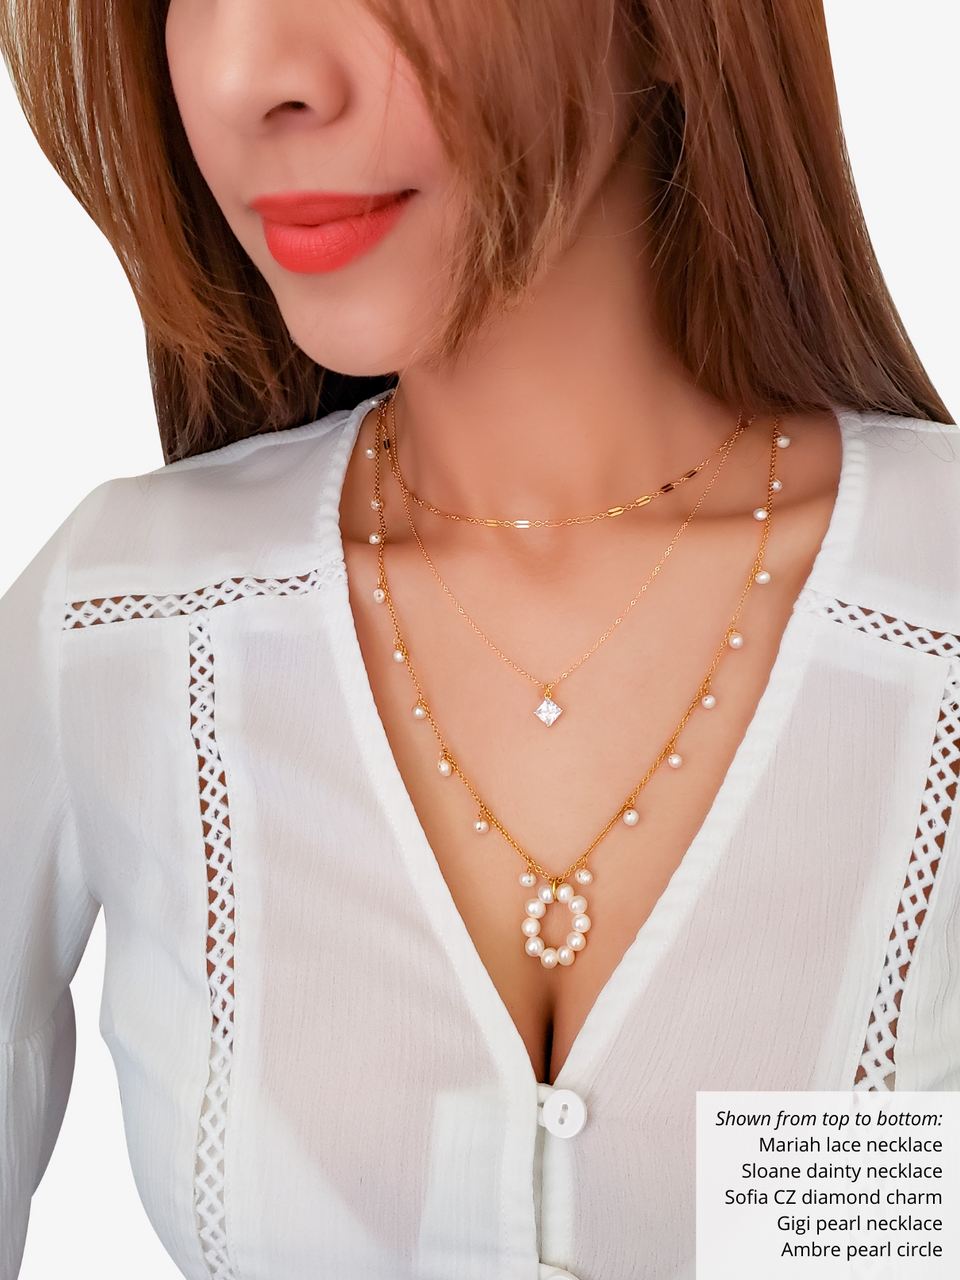 Best All Around Necklace: Gold Chain, Gold Bead Accents Adjustable 16/18 Inches